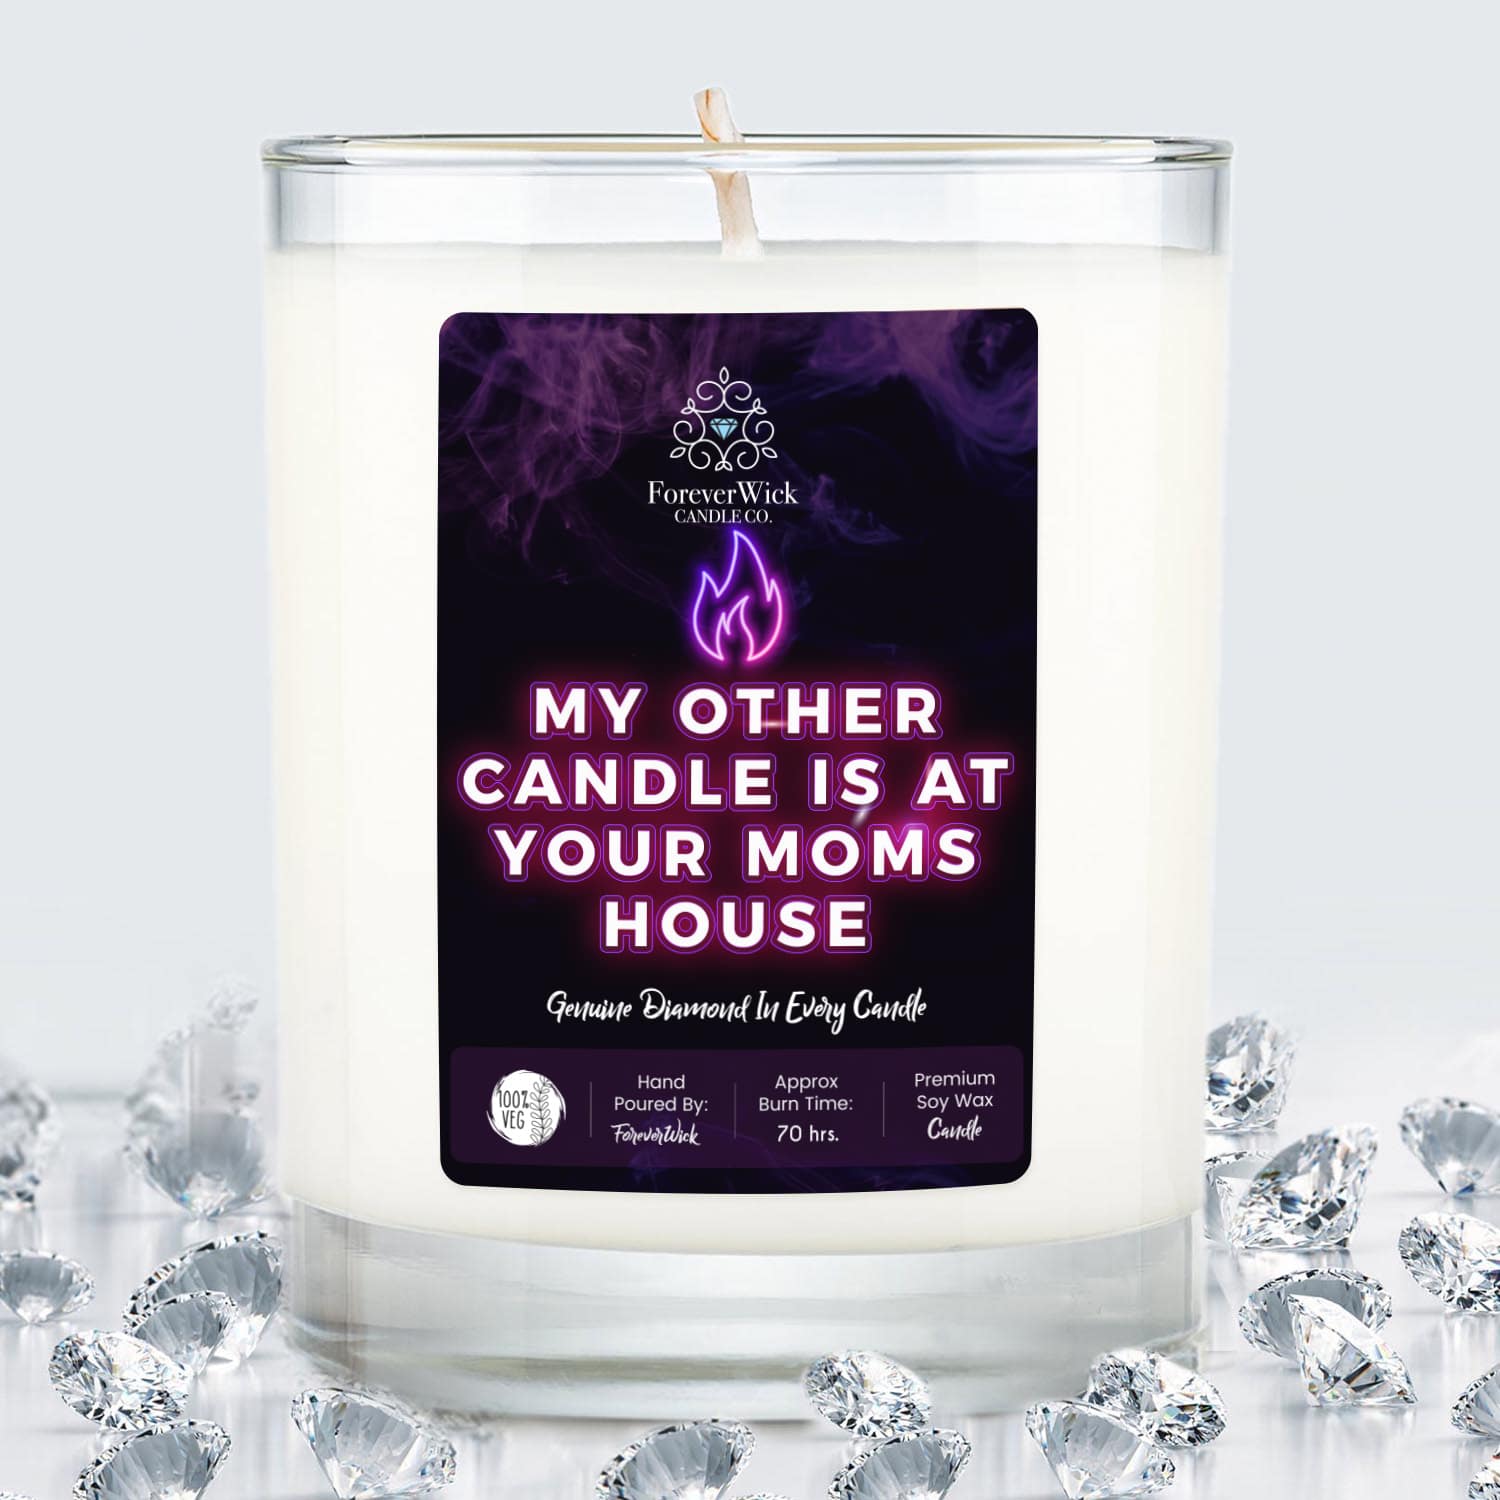 My Other Candle Is At Your Mom's House Diamond Candle